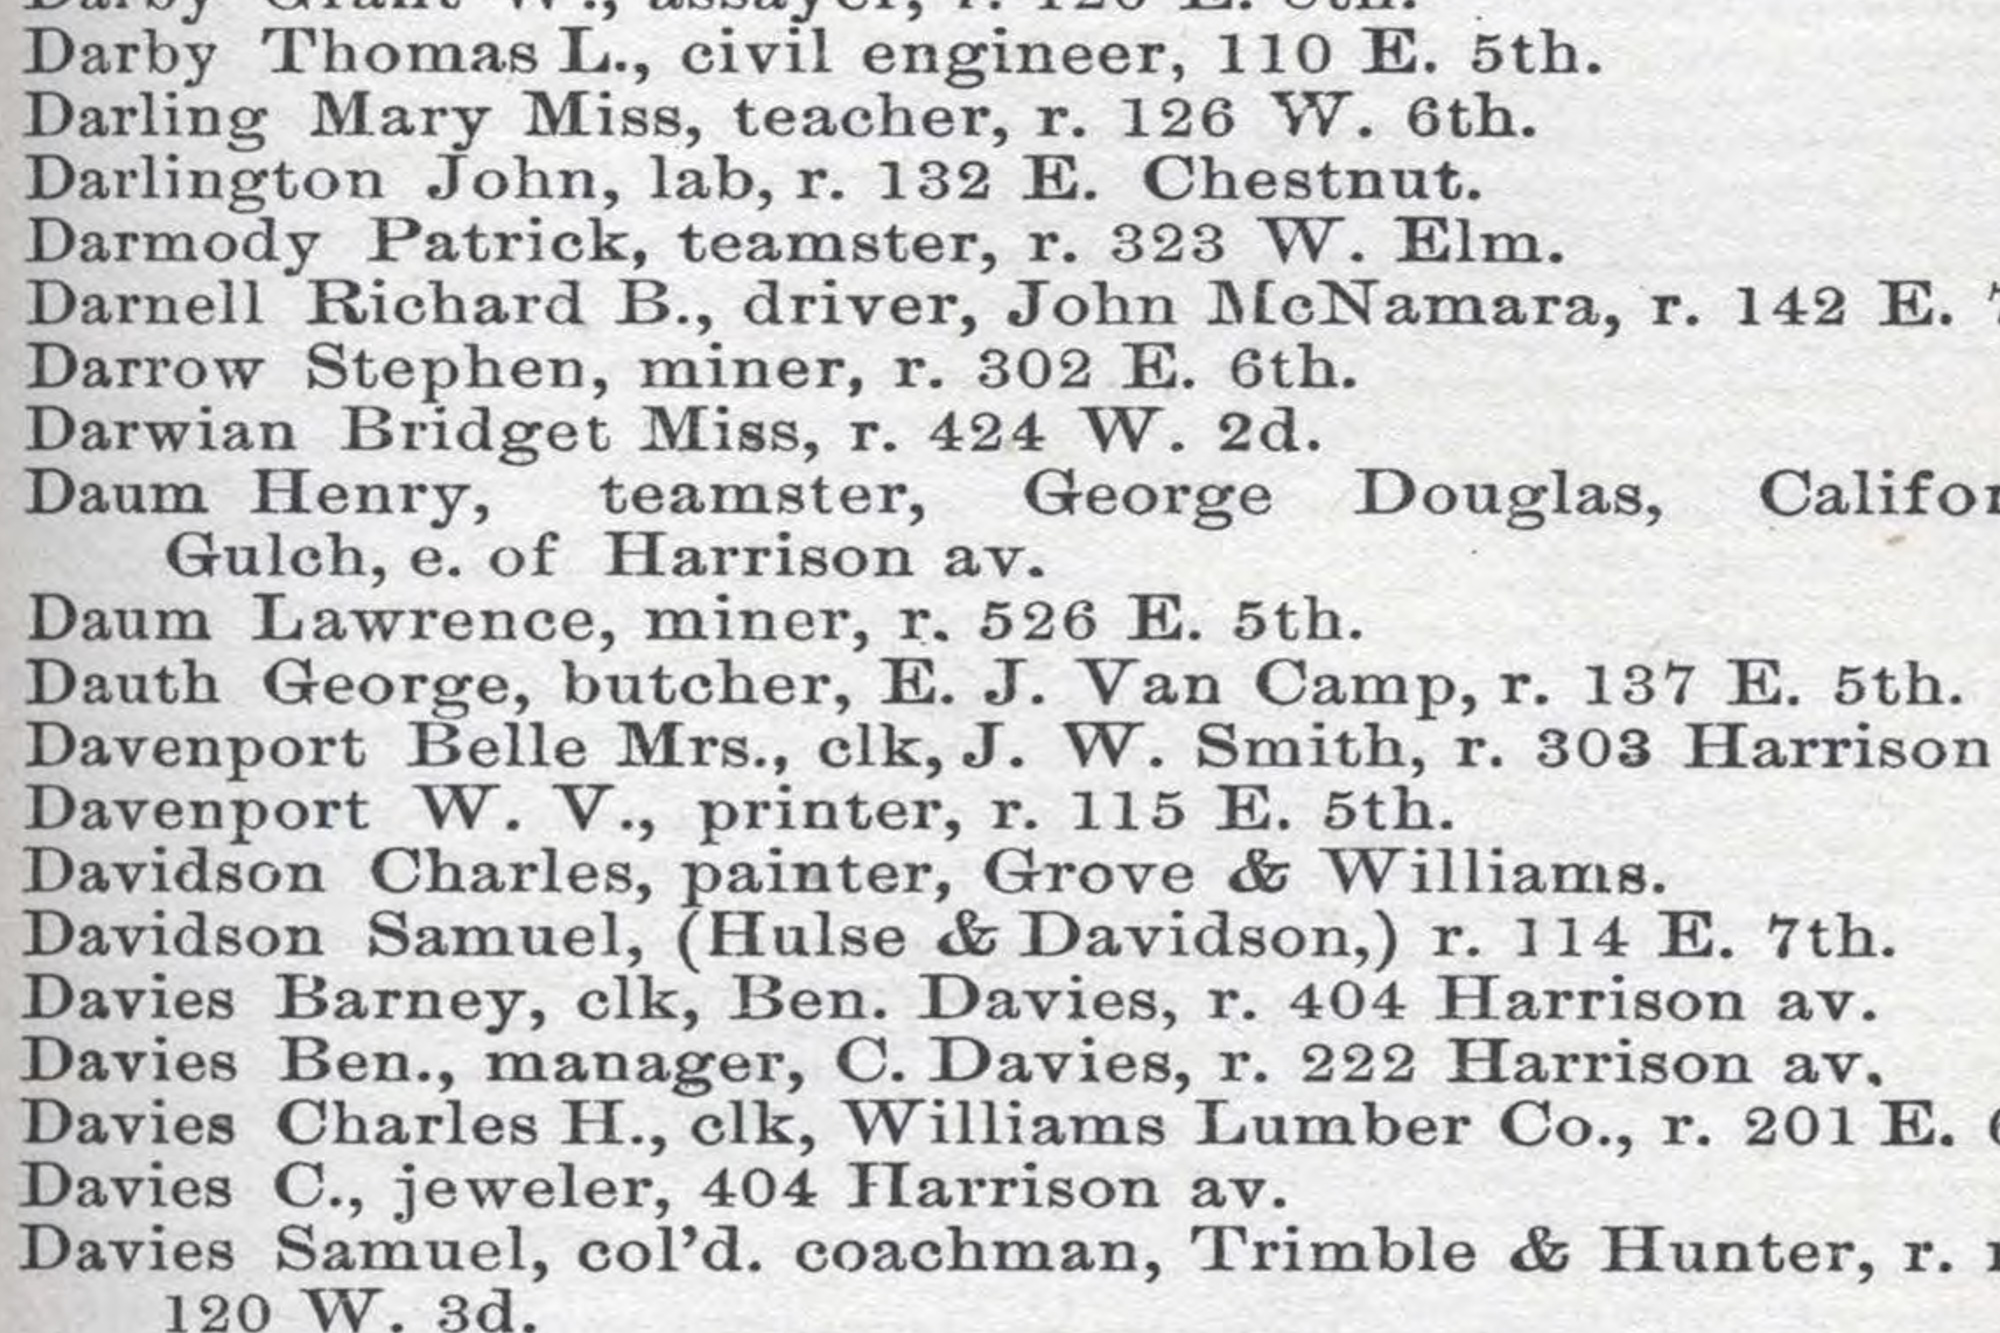 Dauth Family Archive - 1892 - Leadville Directory - Entry for George Dauth